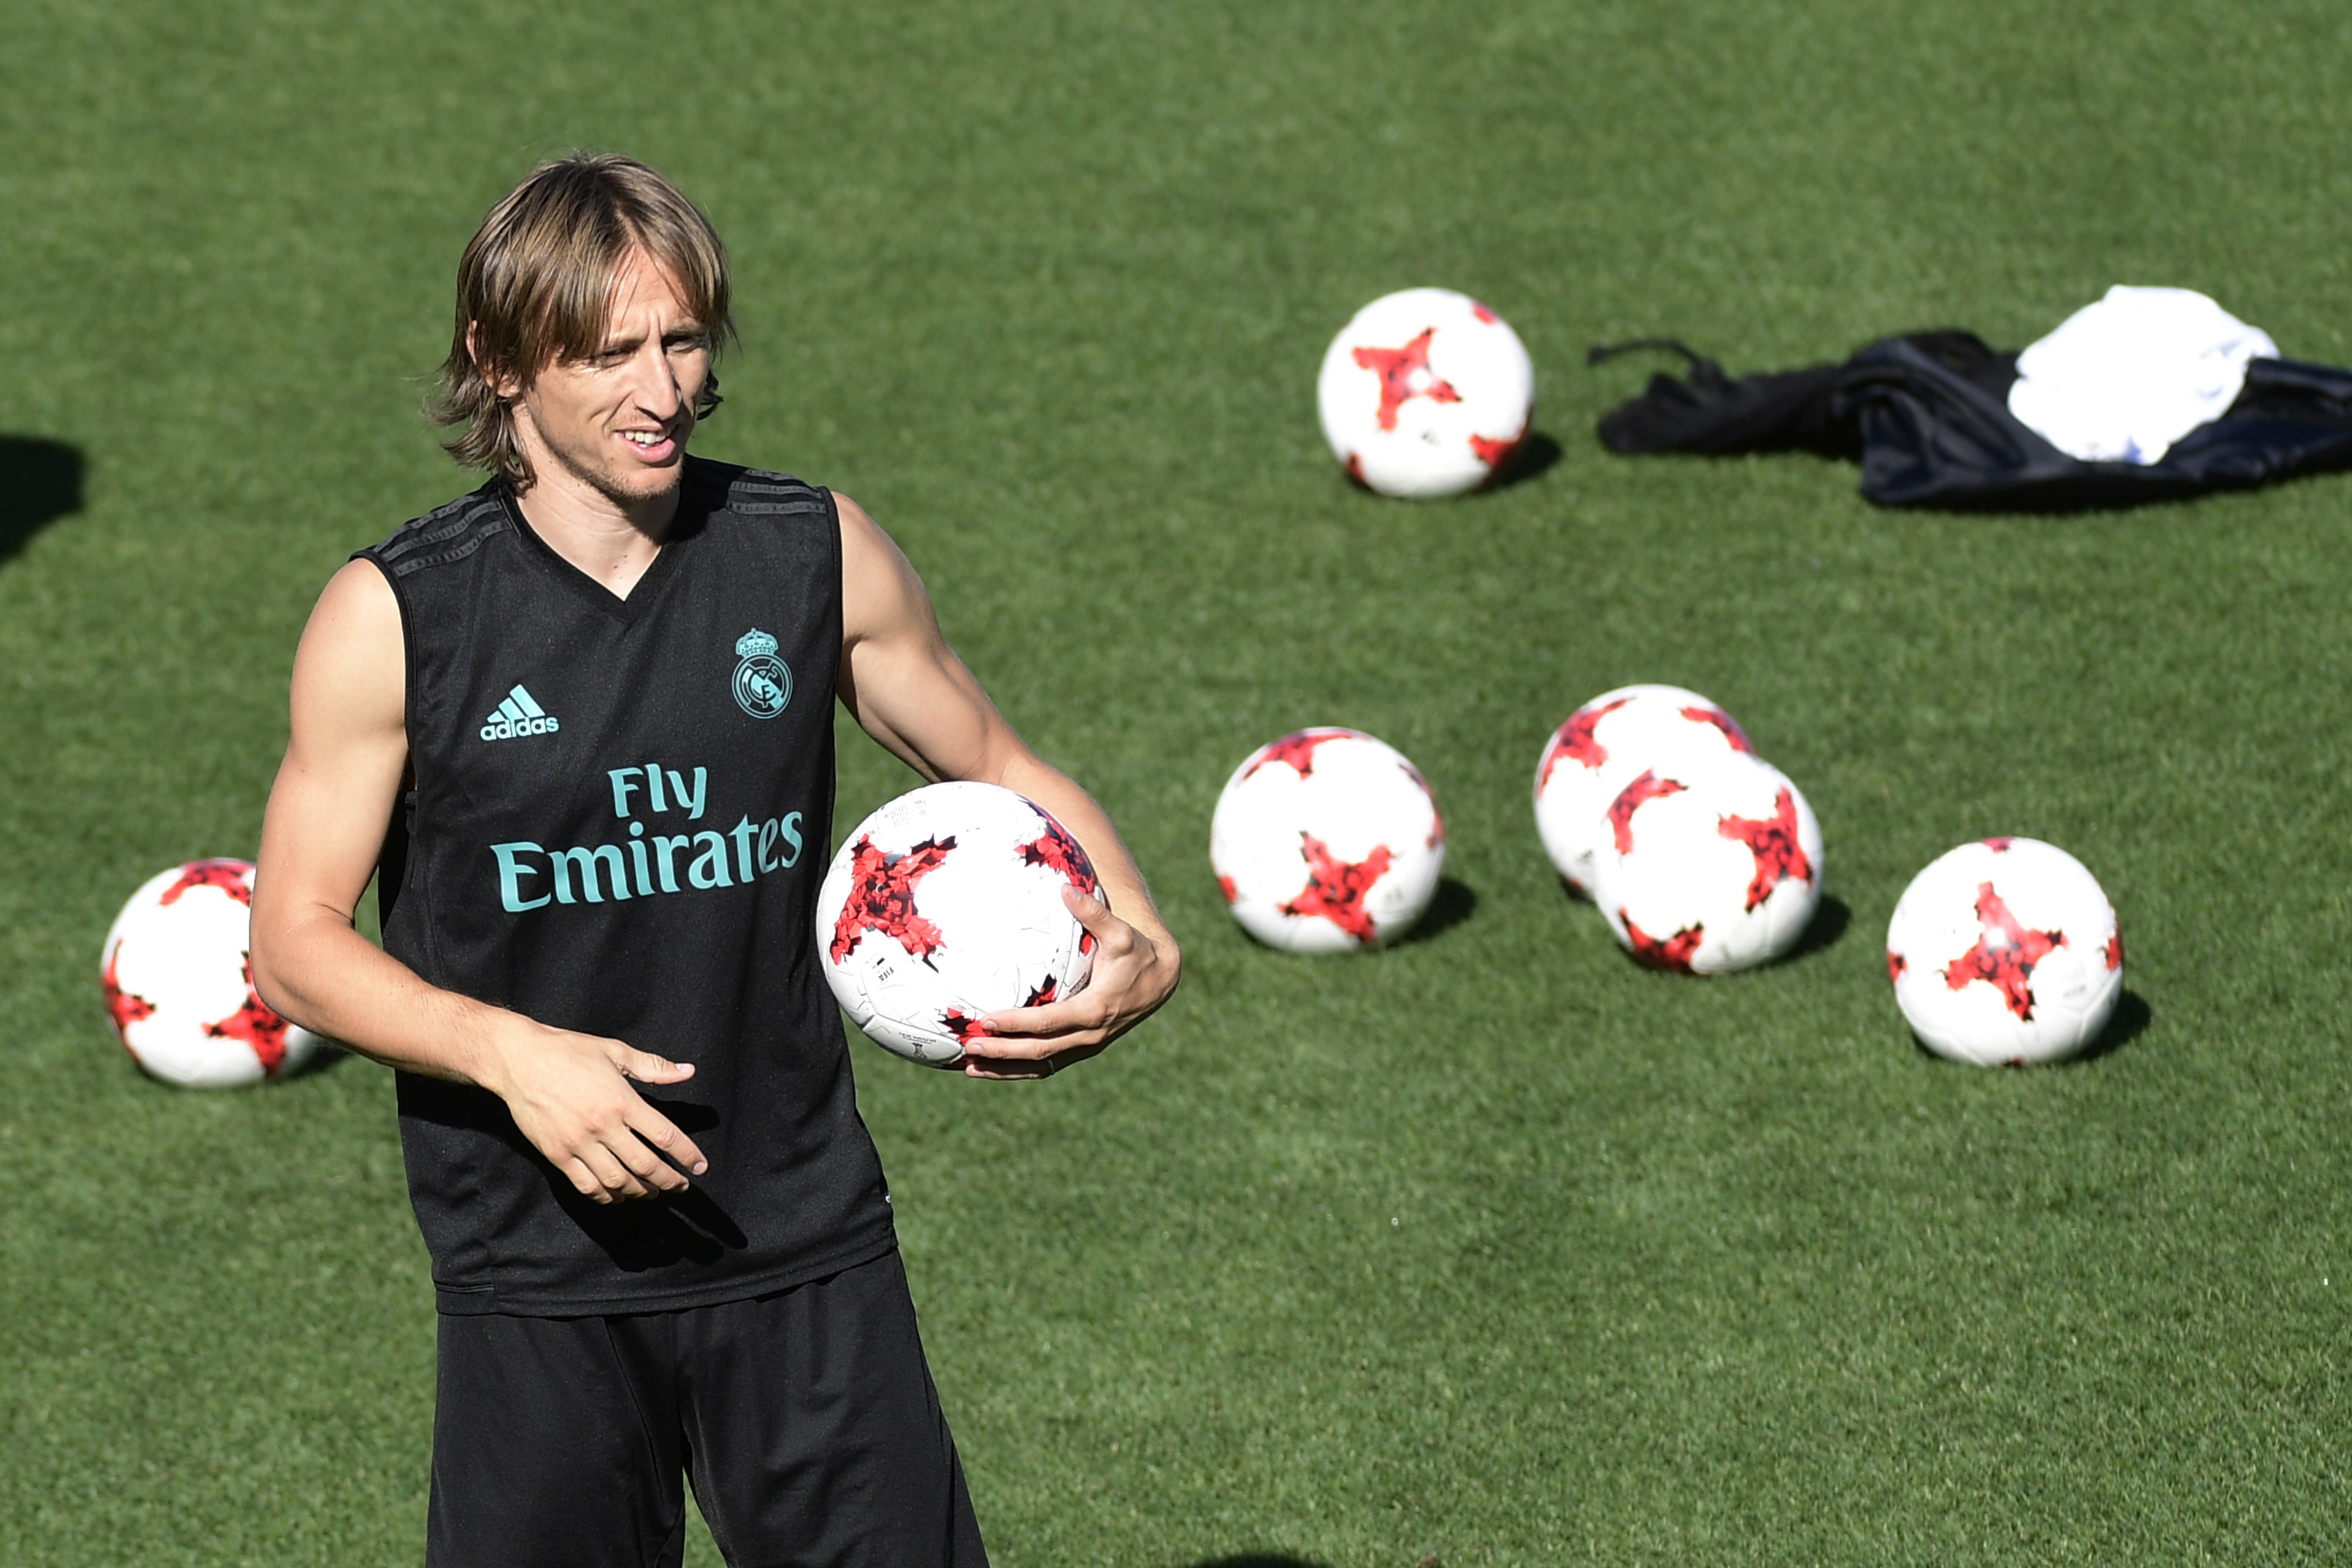 Real Madrid's Croatian midfielder Luka Modric takes part in a training session at Real Madrid sport city in Madrid on August 12, 2017, on the eve of the Spanish SuperCup first leg football match Real Madrid CF vs FC Barcelona. / AFP PHOTO / JAVIER SORIANO        (Photo credit should read JAVIER SORIANO/AFP/Getty Images)